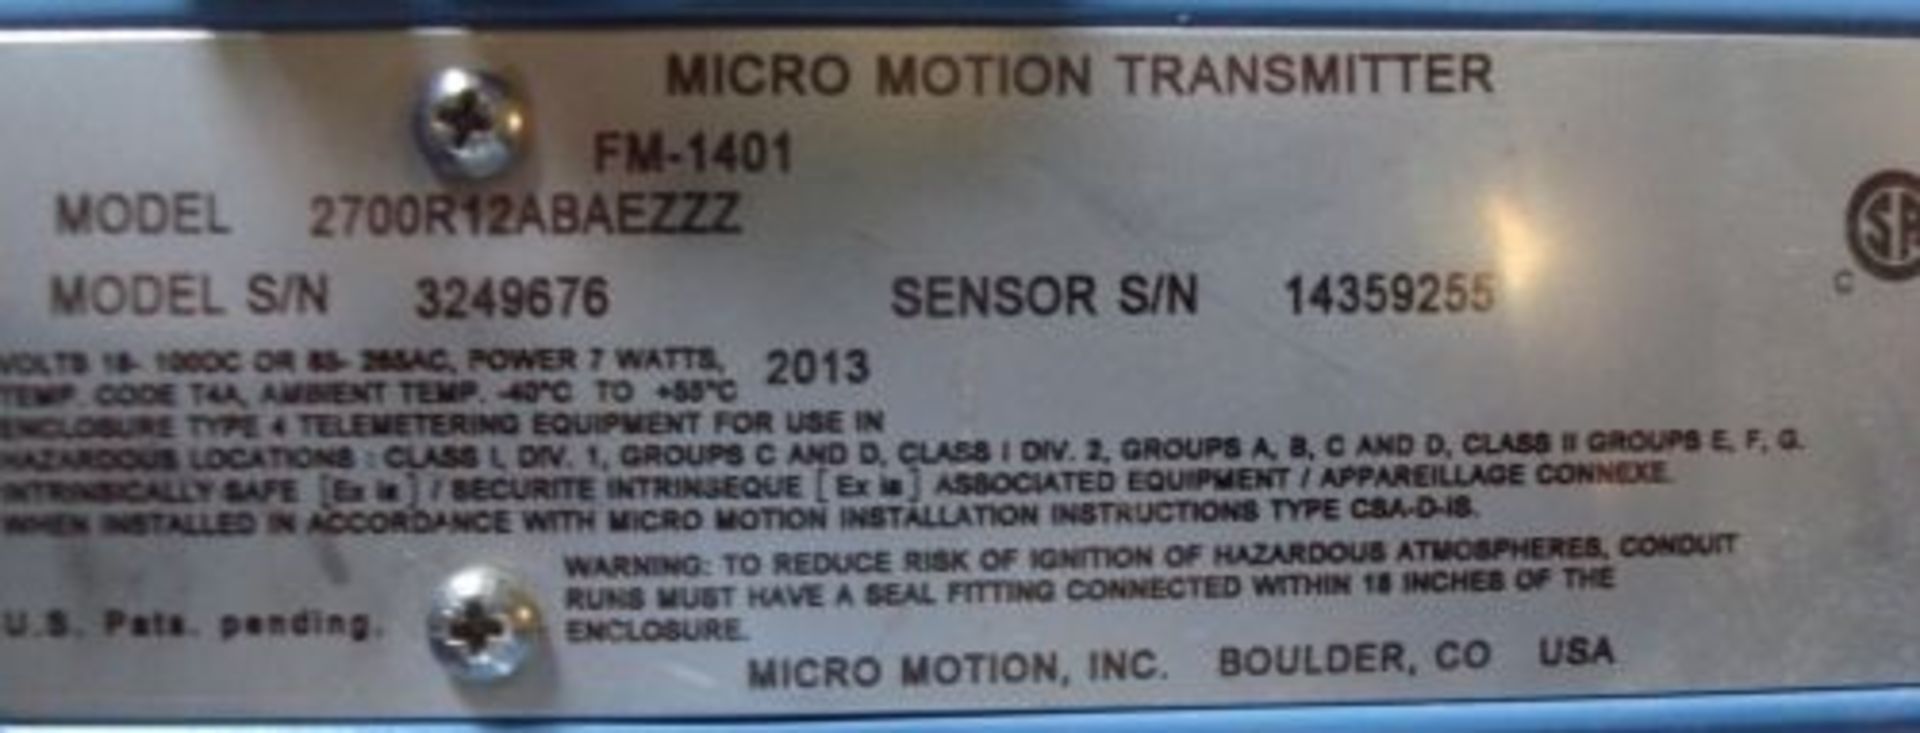 Micro Motion model F050S113SRAUEZZZZ flow meter - Image 7 of 7